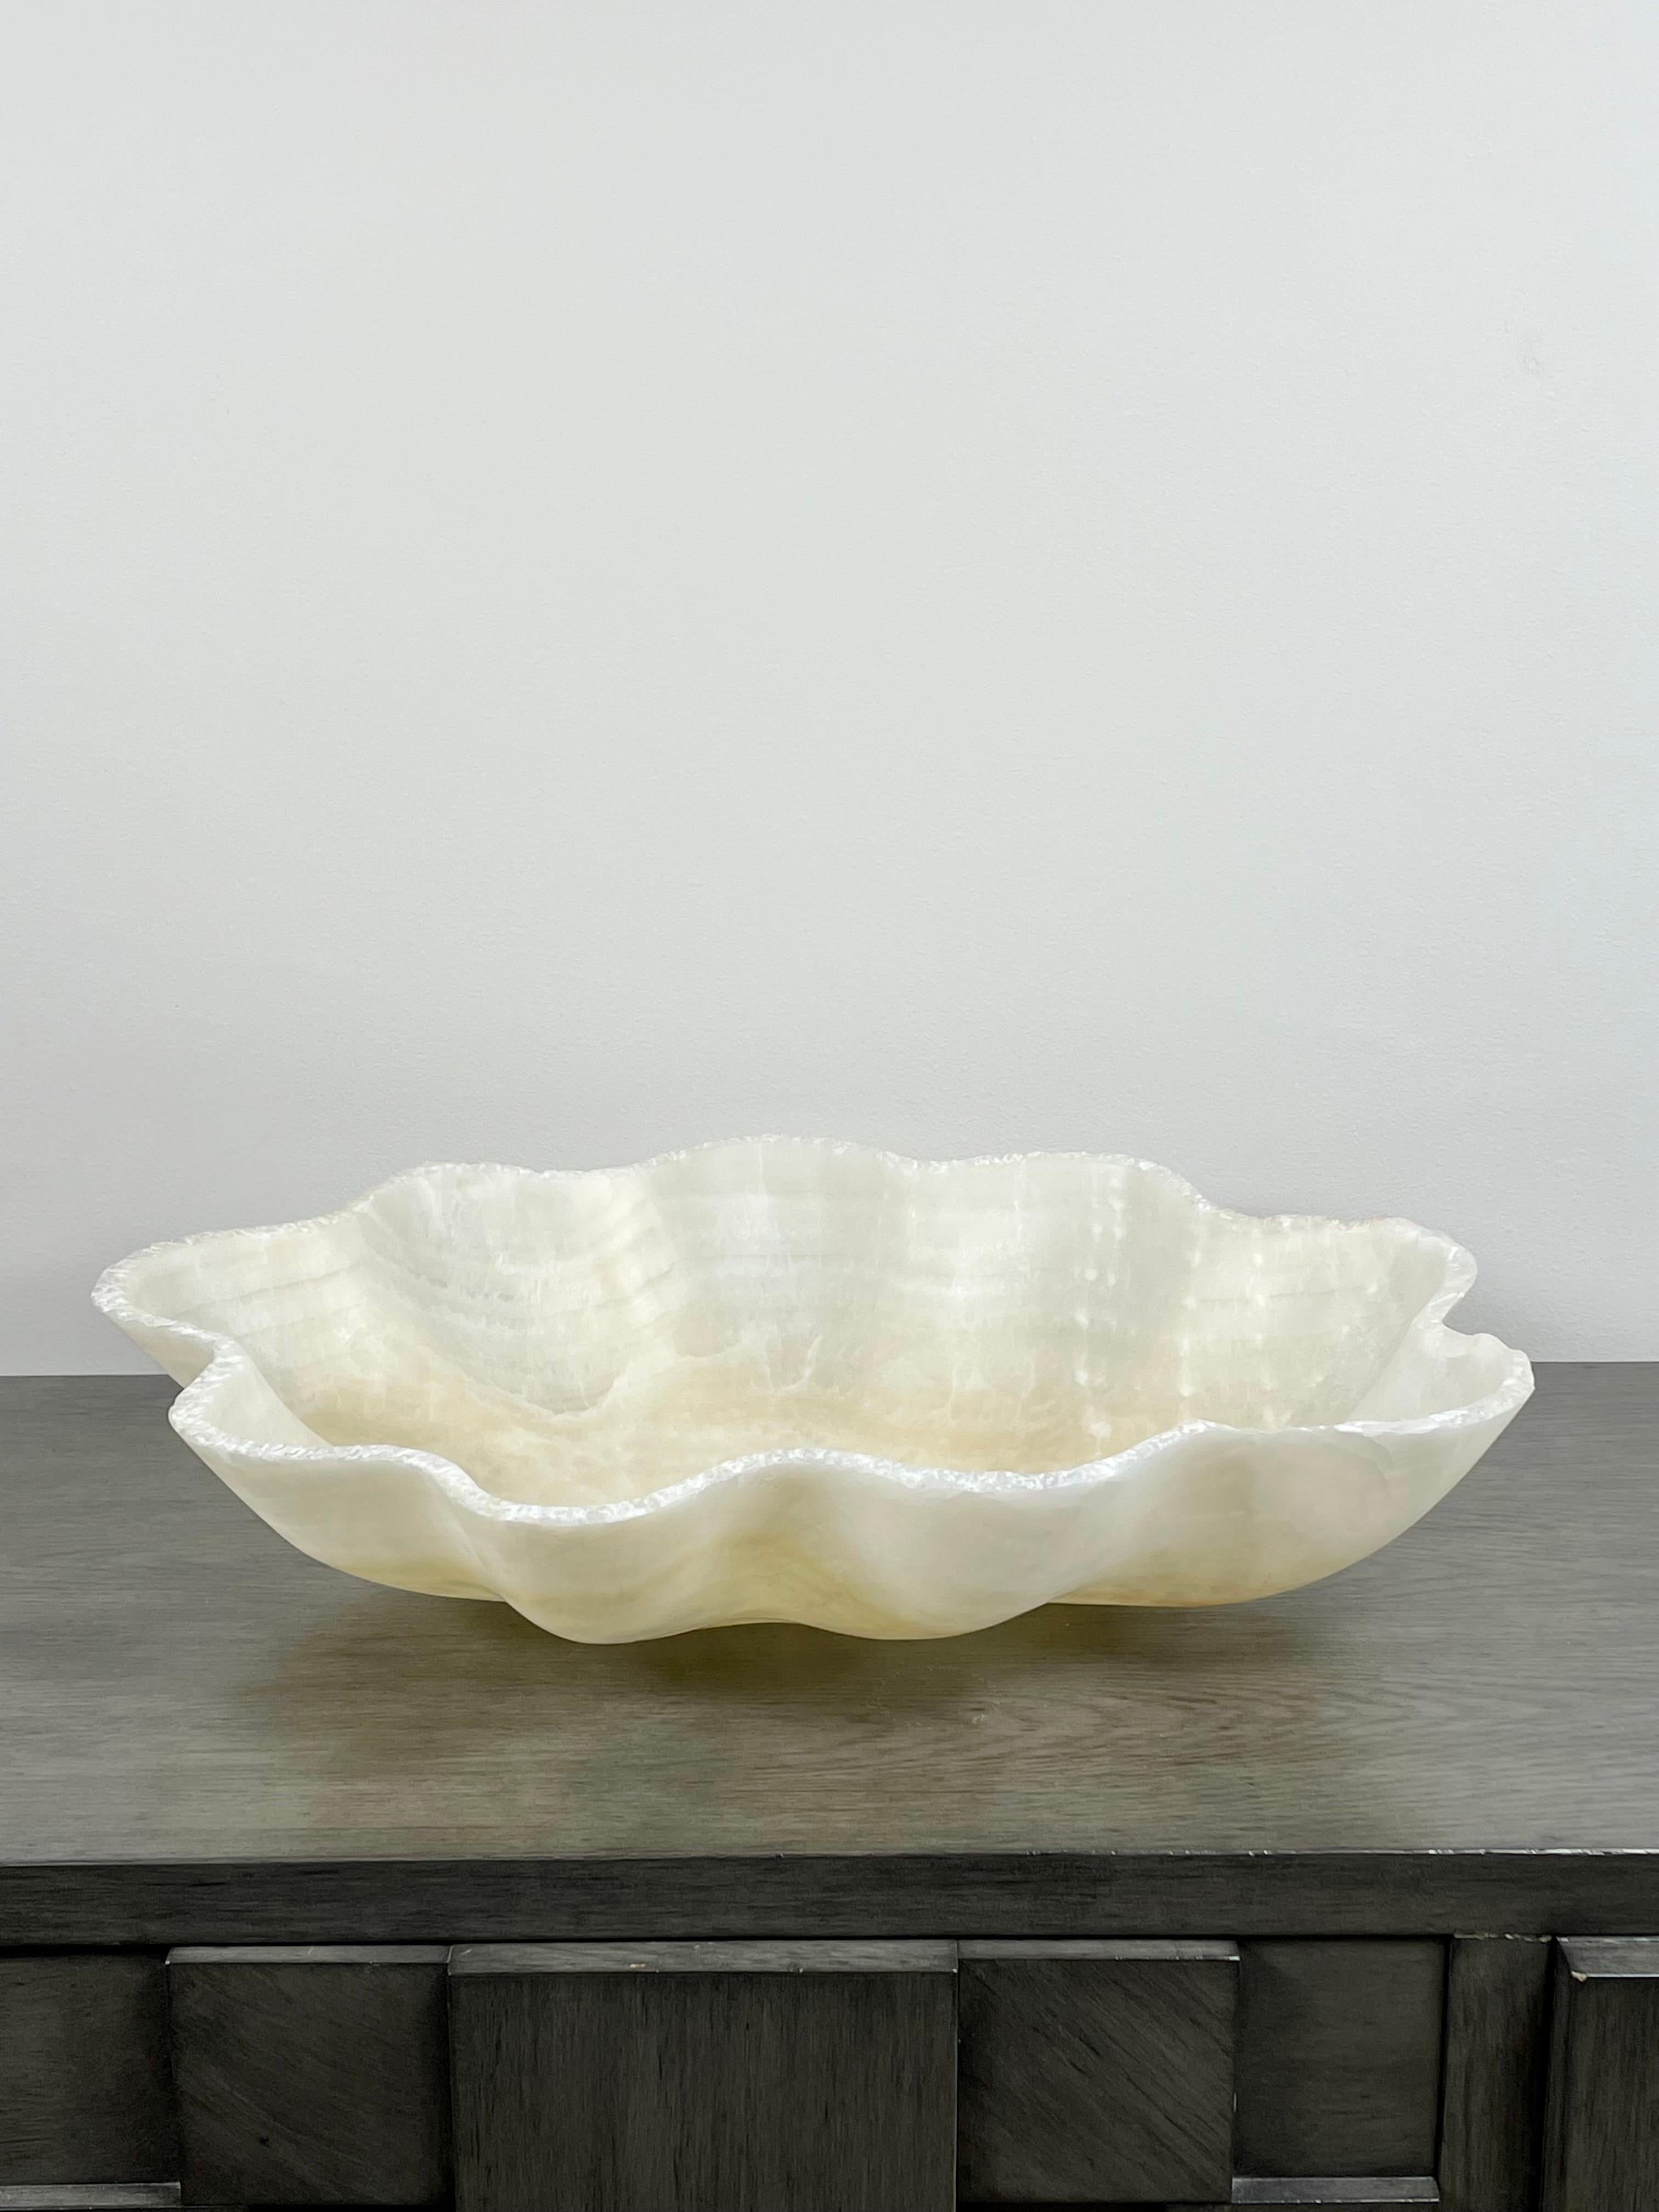 A stunning large scalloped shaped off-white onyx bowl with a raw edge. This one of a kind decorative bowl is meticulously hand-carved from a single piece of onyx by skilled artists to reveal its' inherent characteristics like the formation of layers